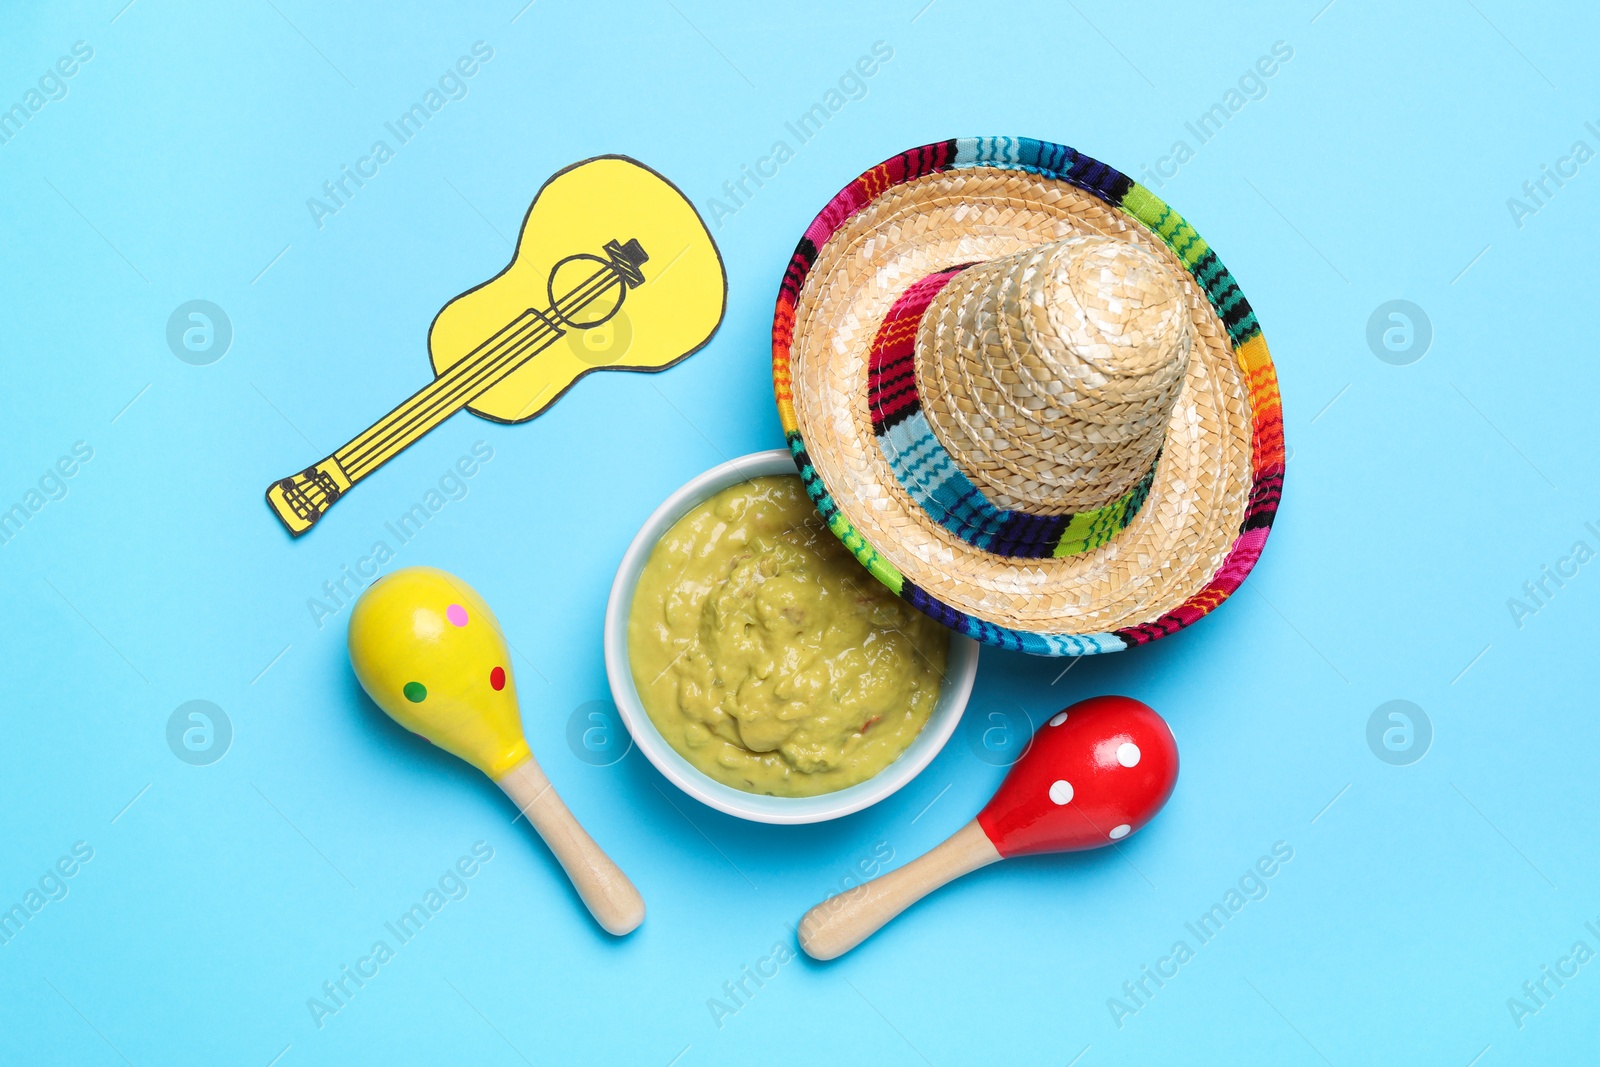 Photo of Mexican sombrero hat, guacamole, maracas and paper guitar on light blue background, flat lay